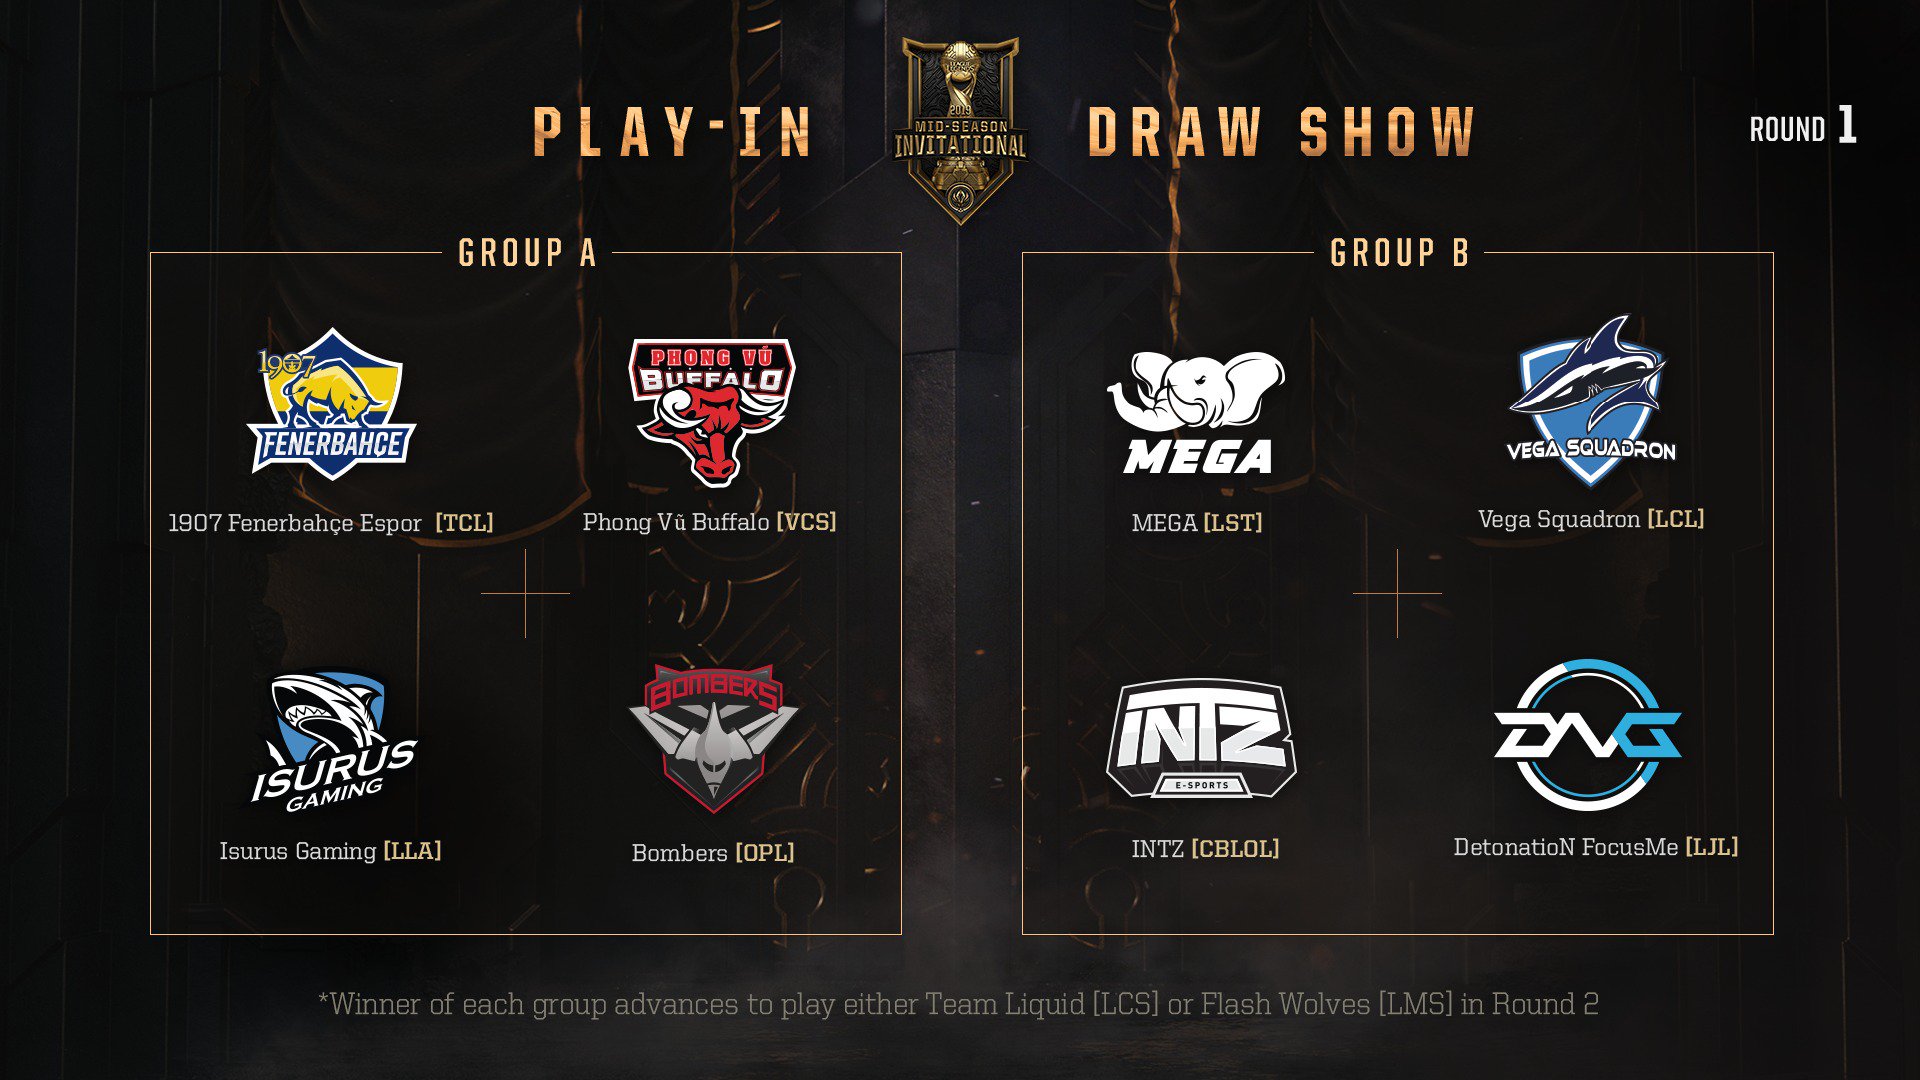 Mid-Season Invitational Pay-In groups